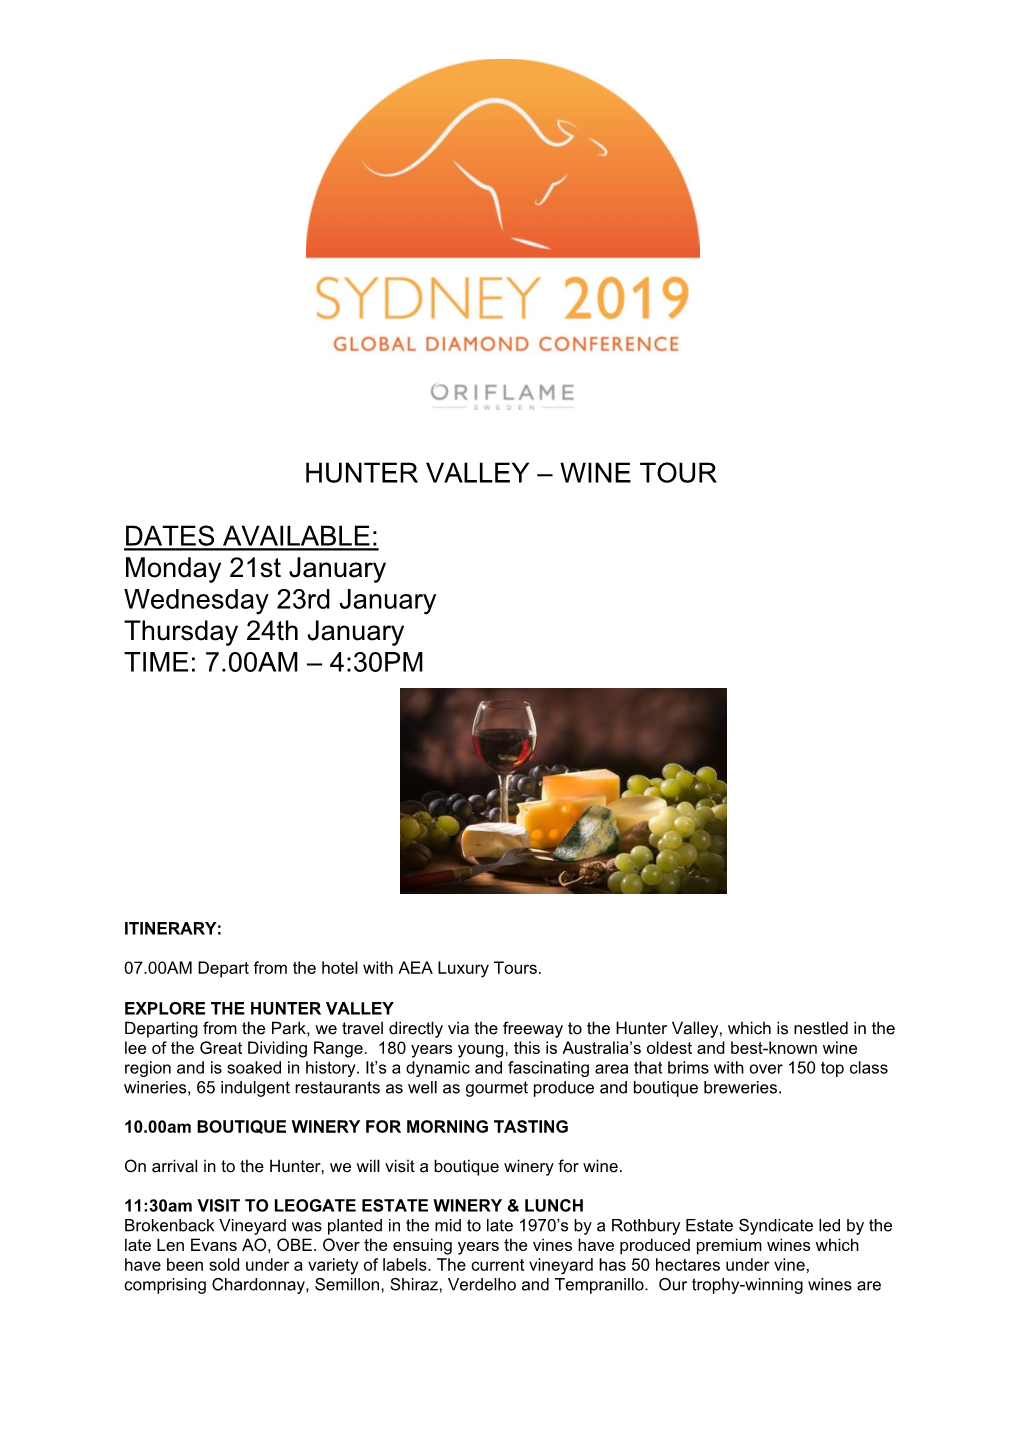 HUNTER VALLEY – WINE TOUR DATES AVAILABLE: Monday 21St